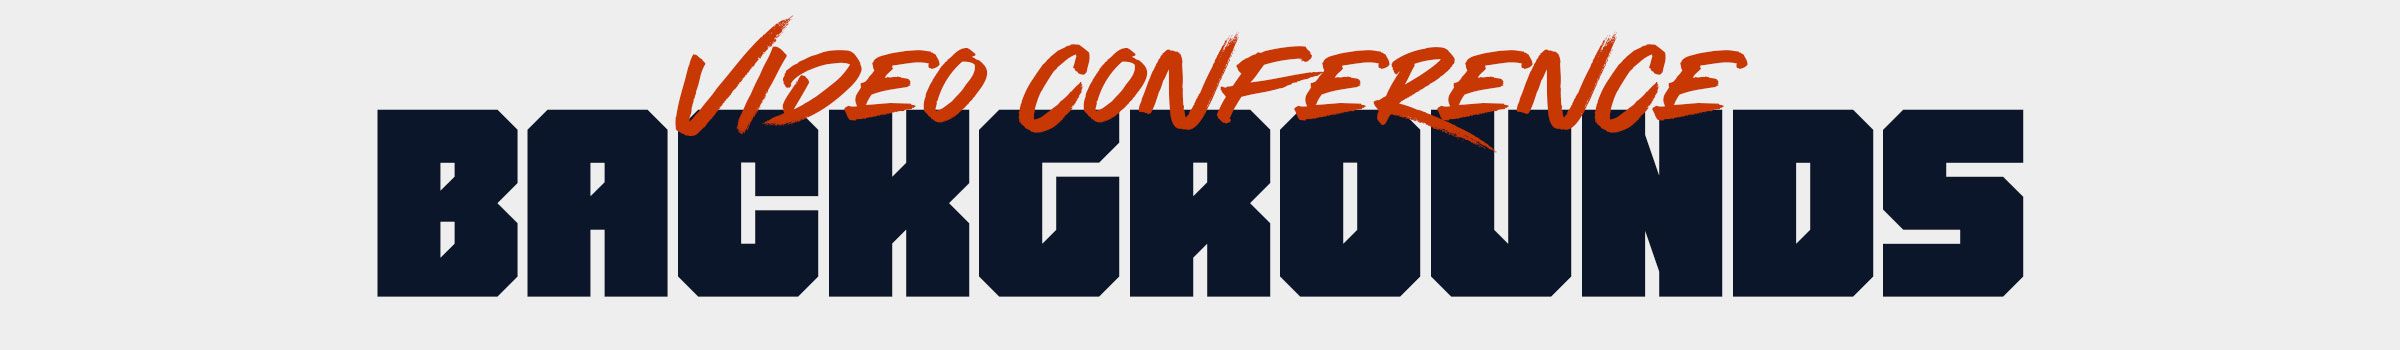 Video Conference Backgrounds | Chicago Bears Official Website